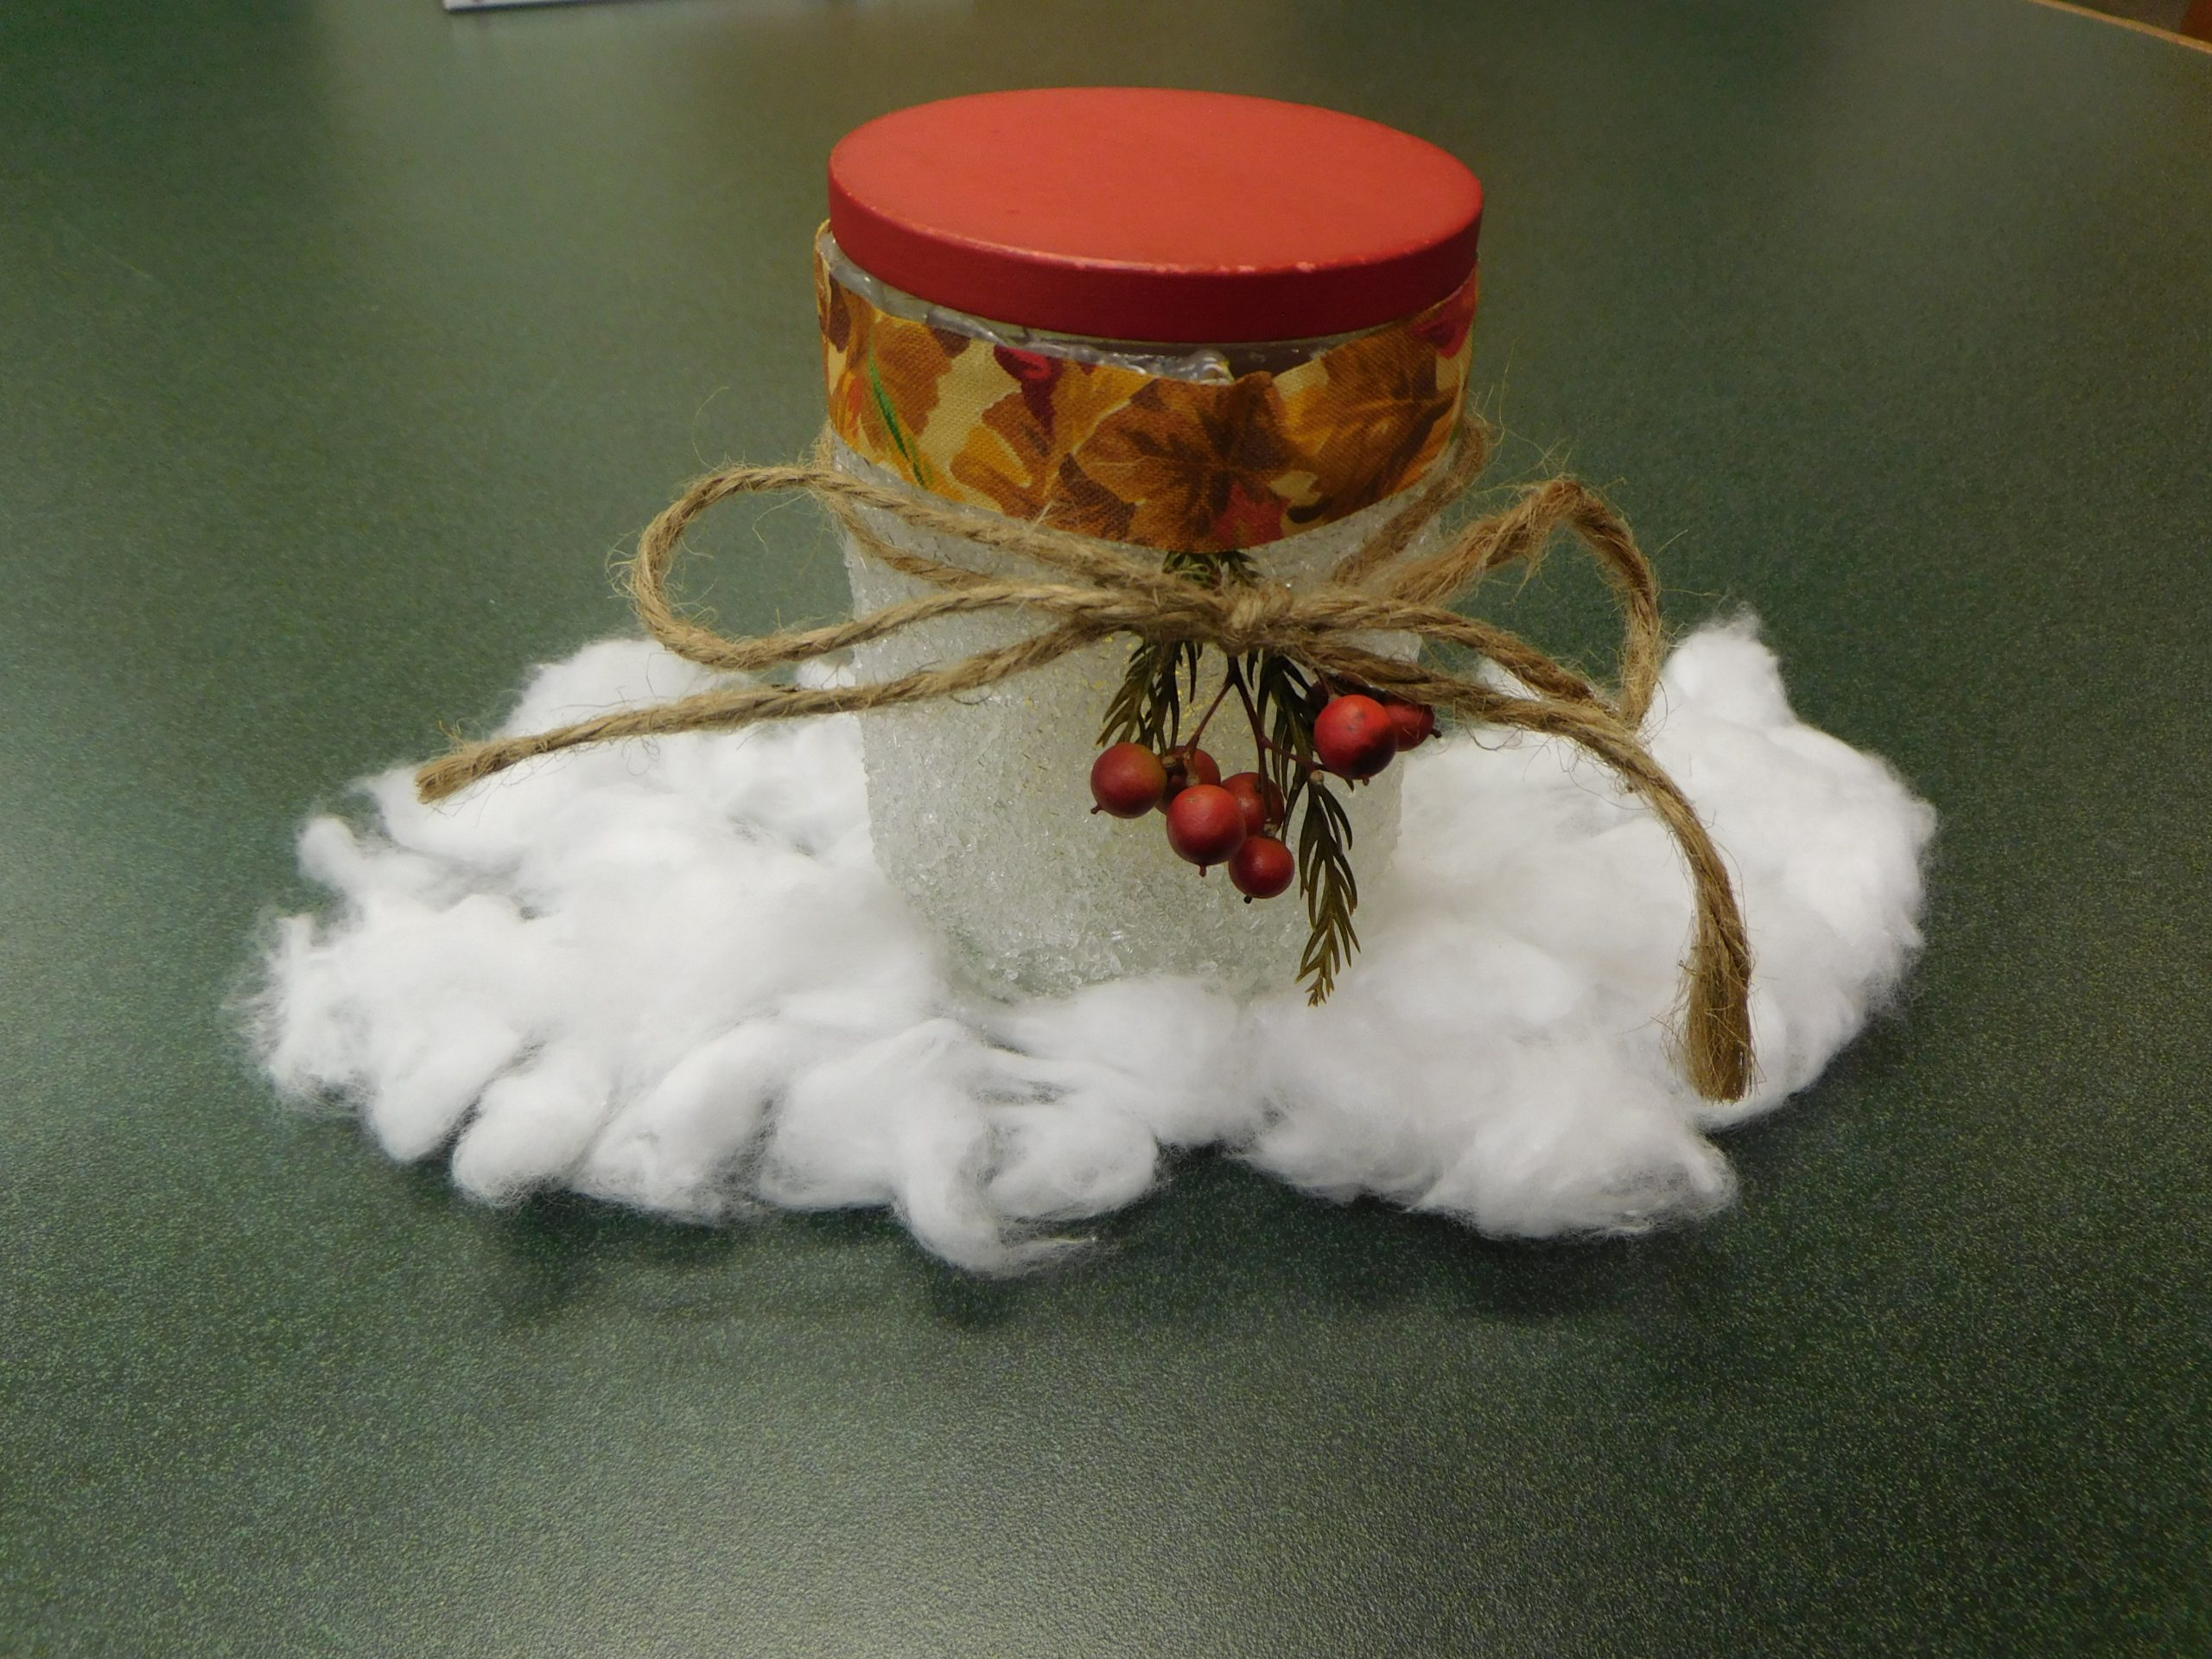 Decorative crafted holiday jar with candle inside